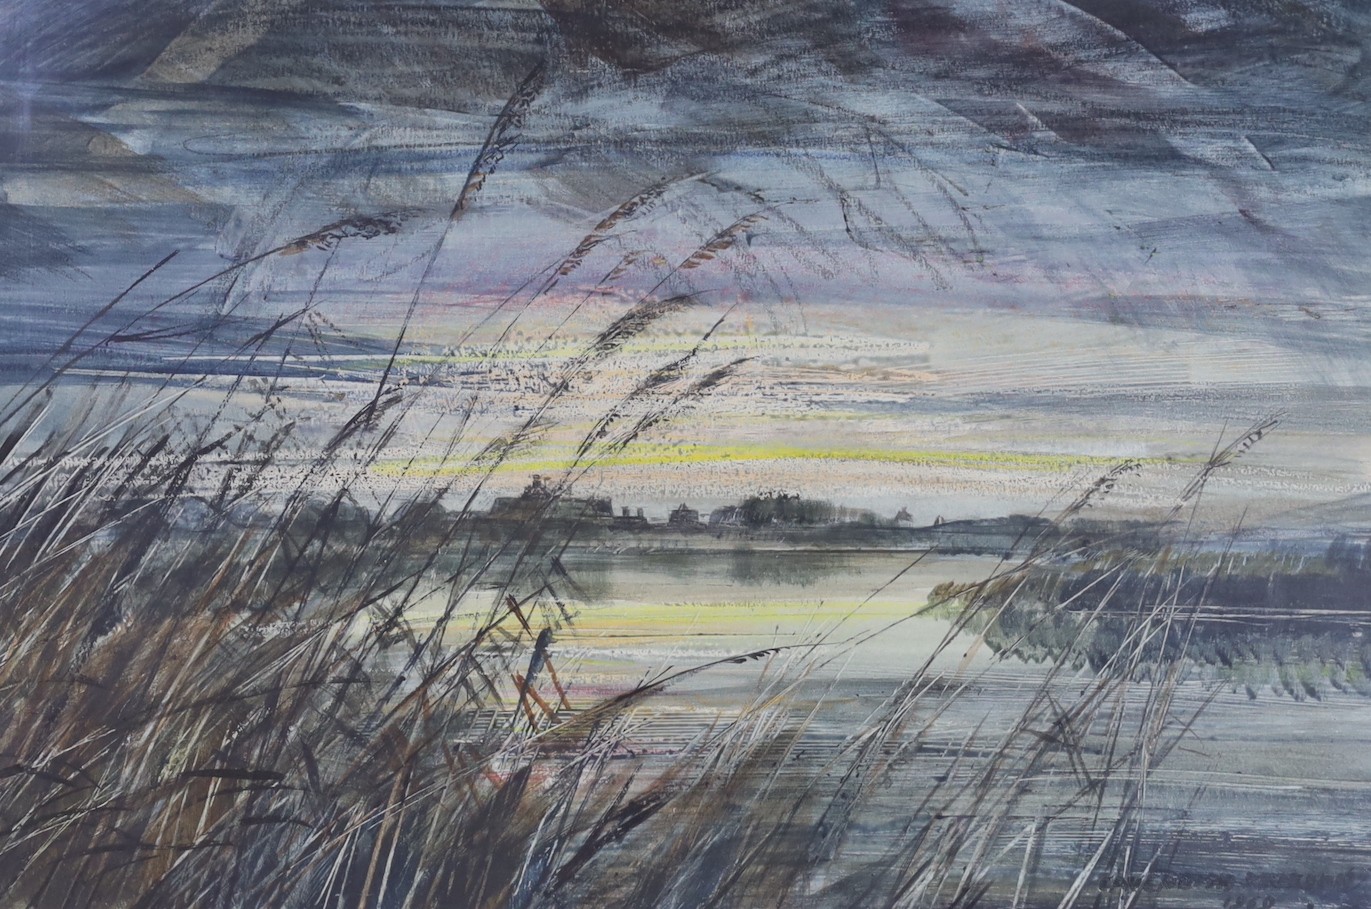 Cavendish Morton (1911-2015), watercolour riverscape, signed and dated 1969